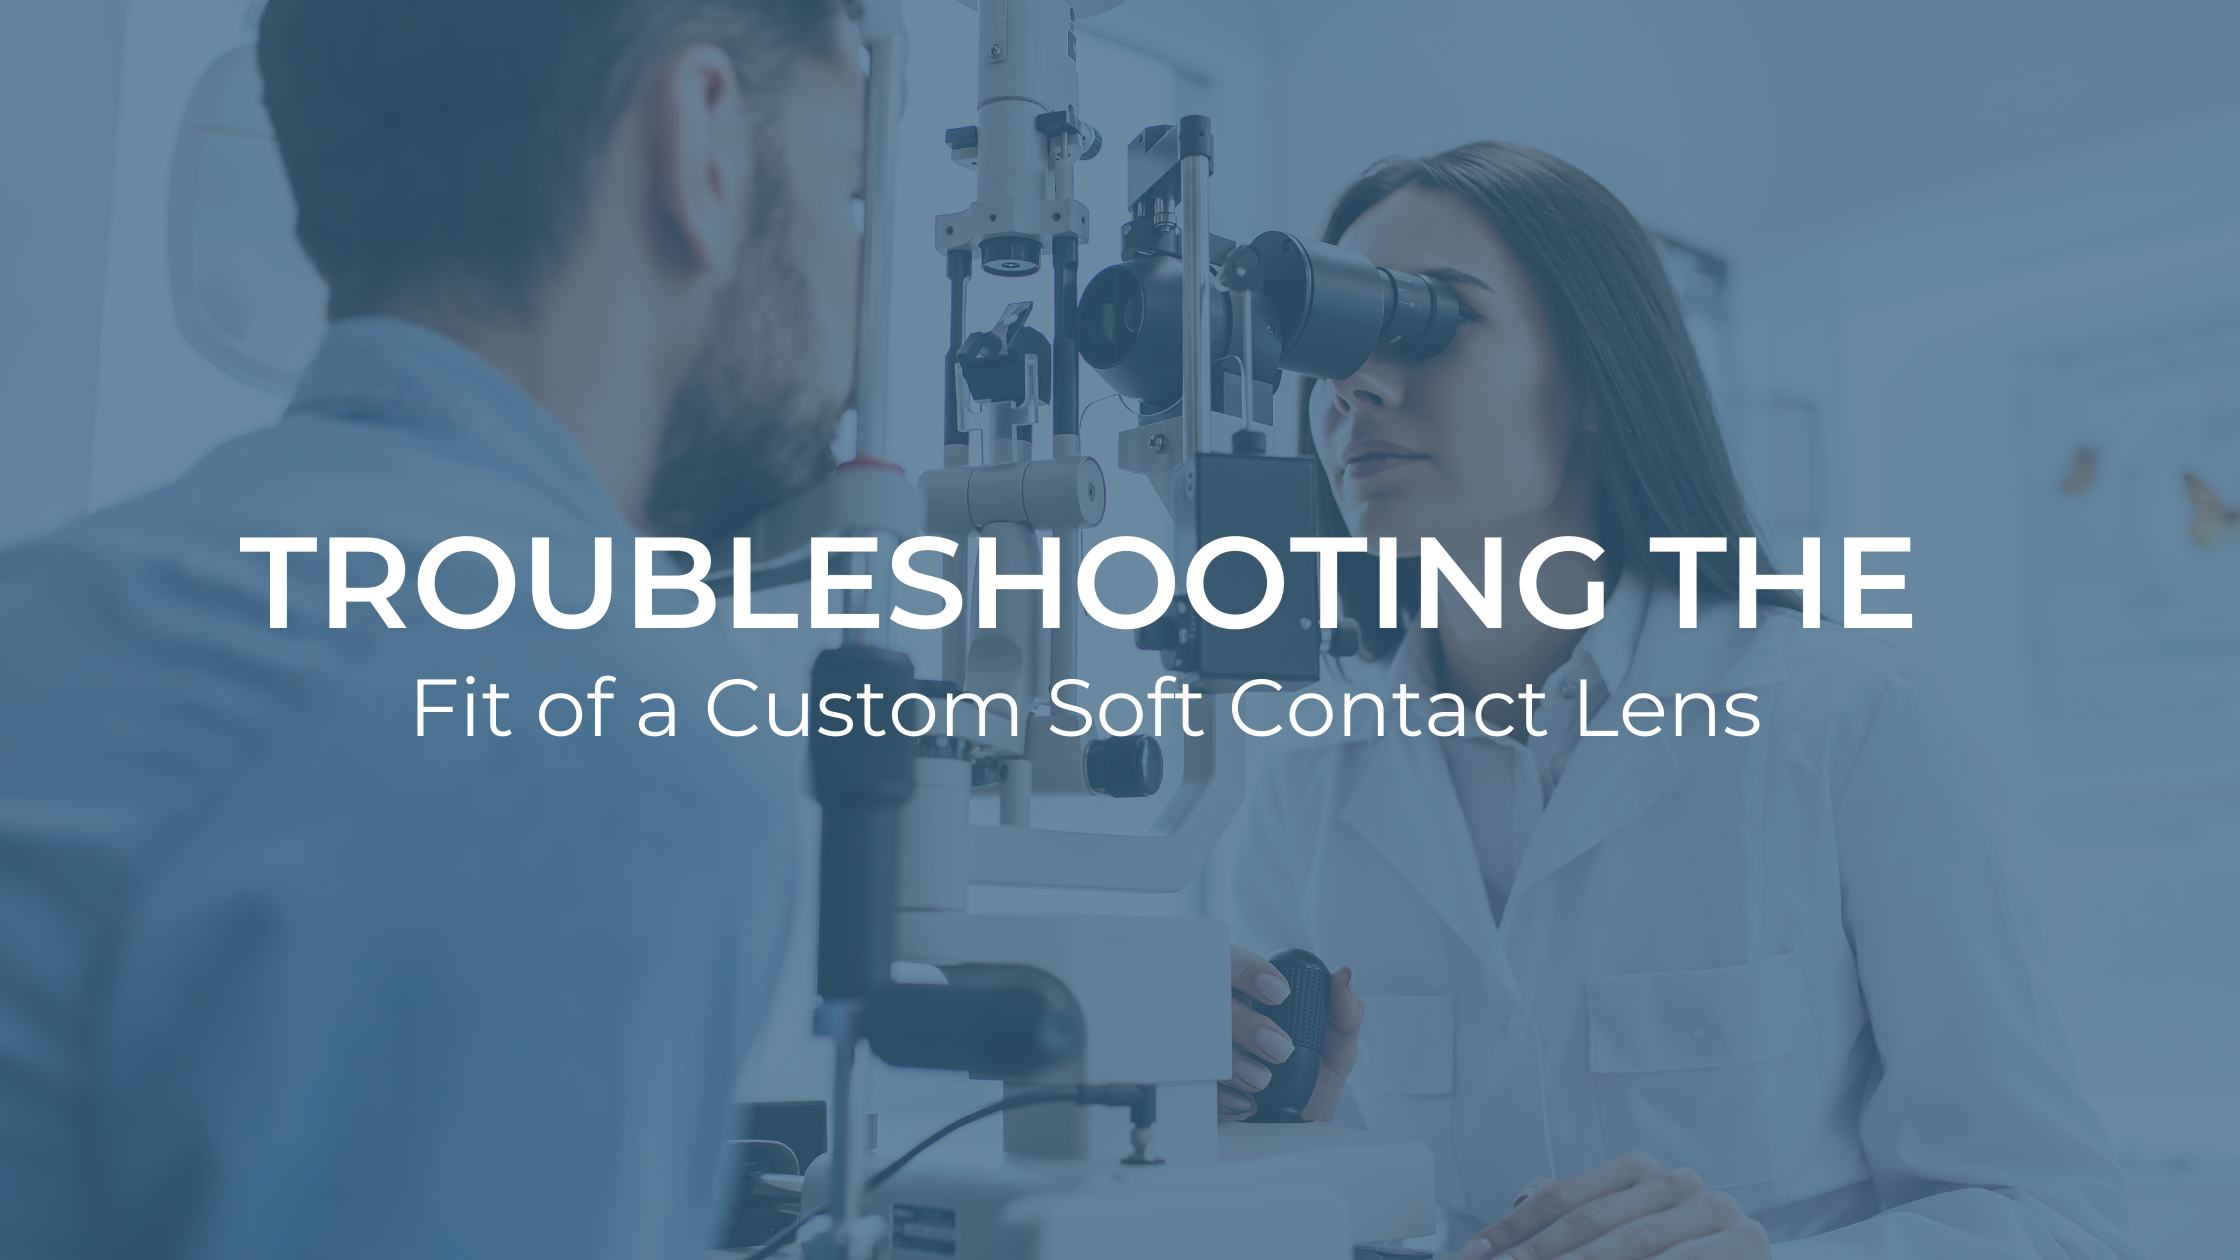 Trouble-shooting the Fit of a Custom Soft Contact Lens